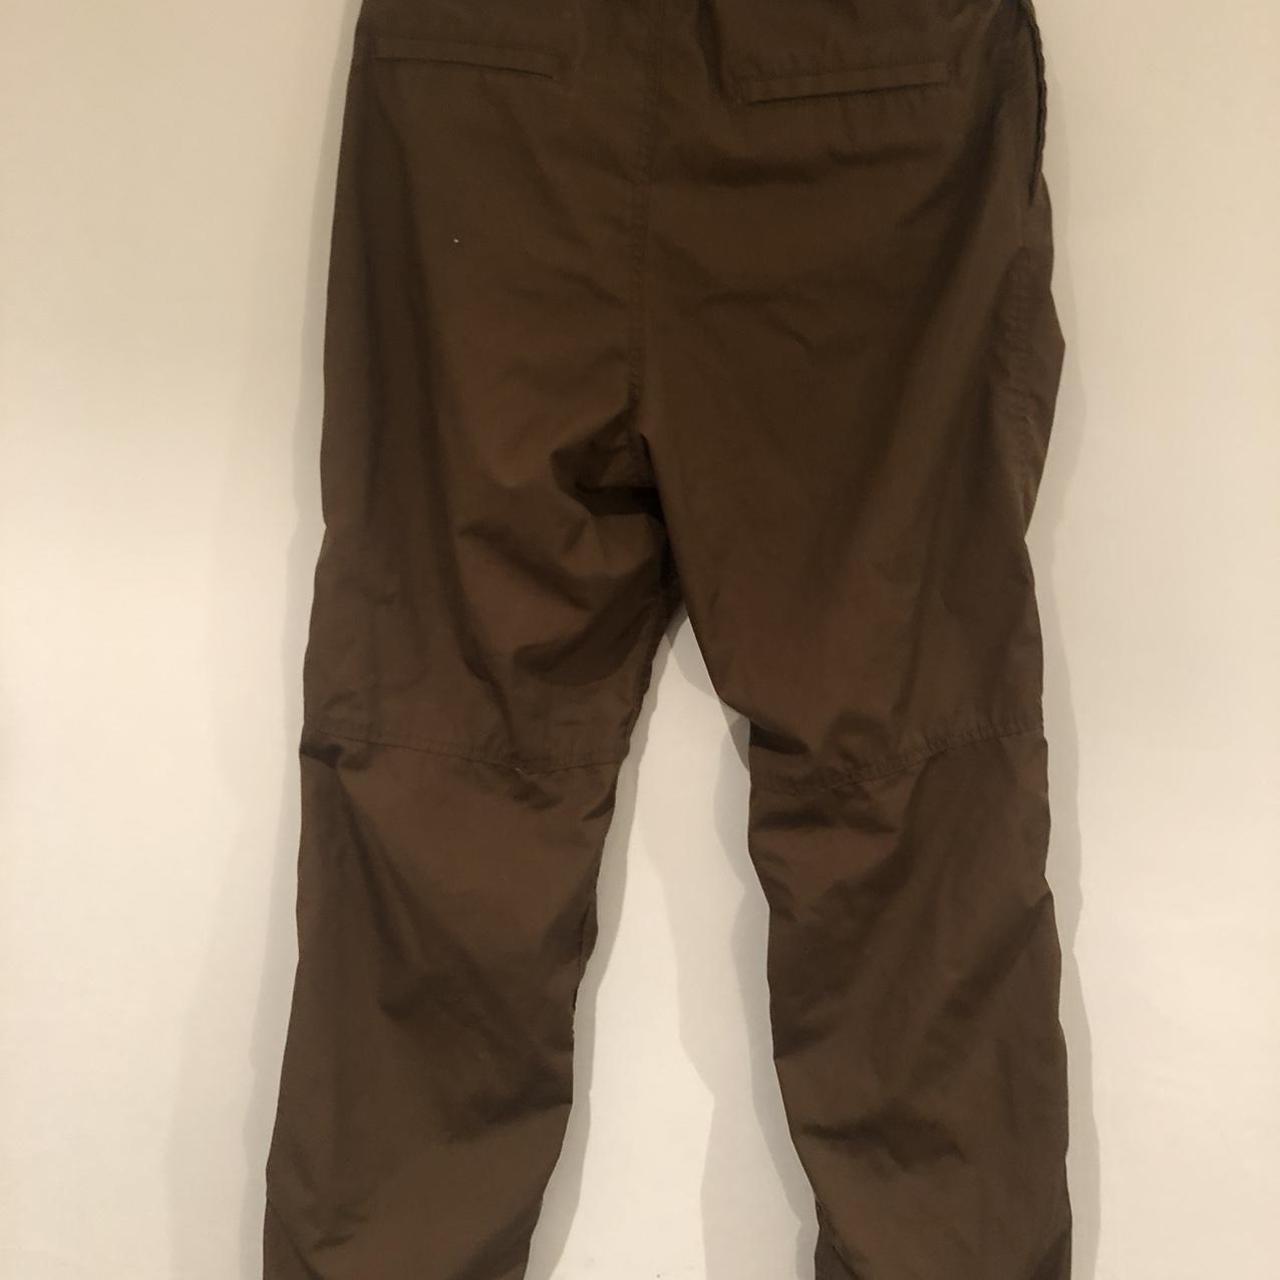 RELAXED FIT MENS TROUSERS COLOUR BROWN SIZE - SMALL... - Depop